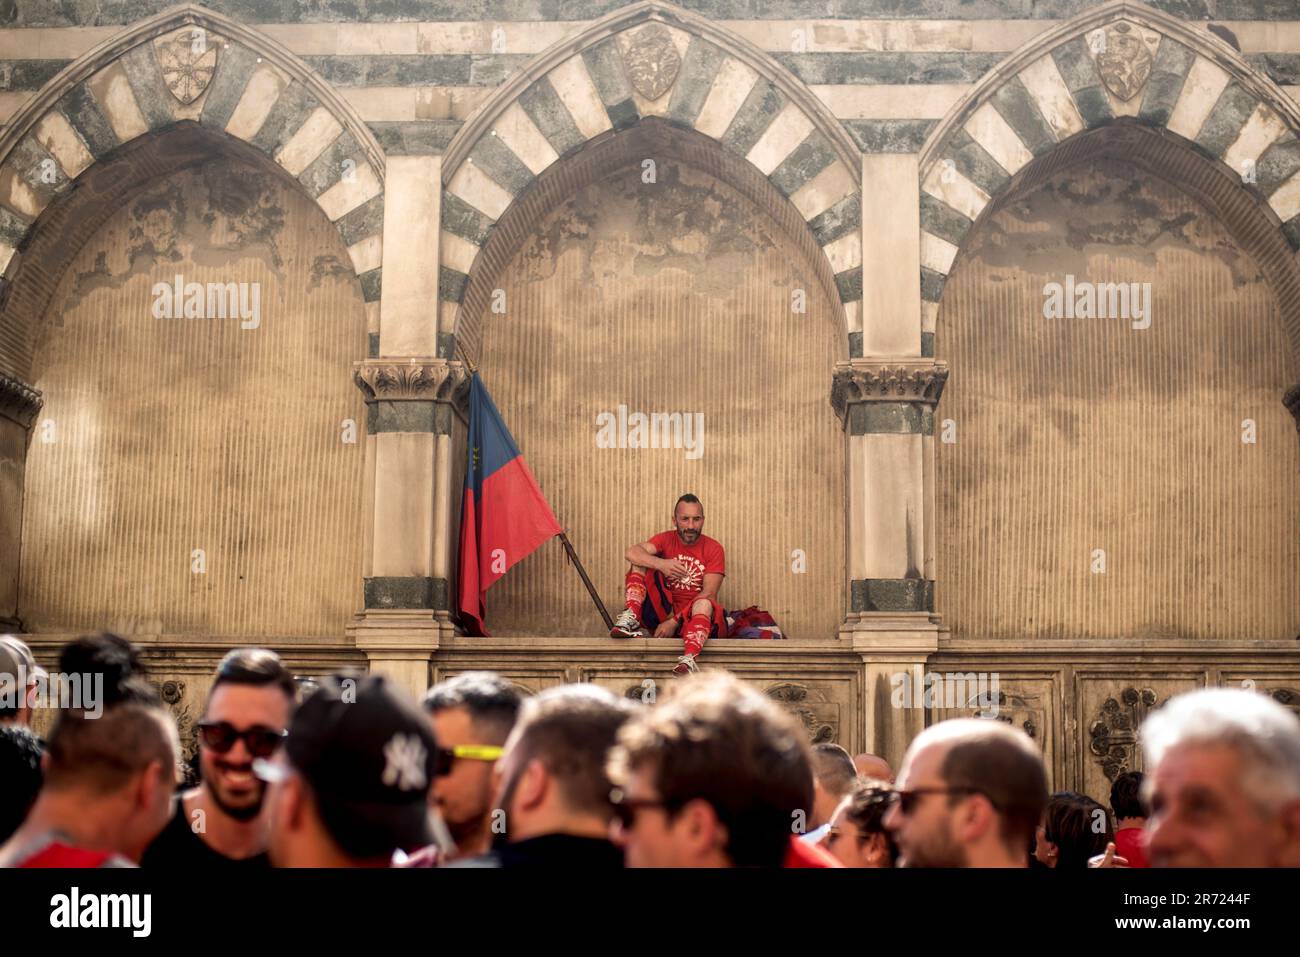 FLORENCE, ITALY, JUNE 11th - The captain of Rossi (Red team) looks down on  his audience in the procession before the semifinal begins.The game of  Calcio Storico Fiorentino is a challenge between